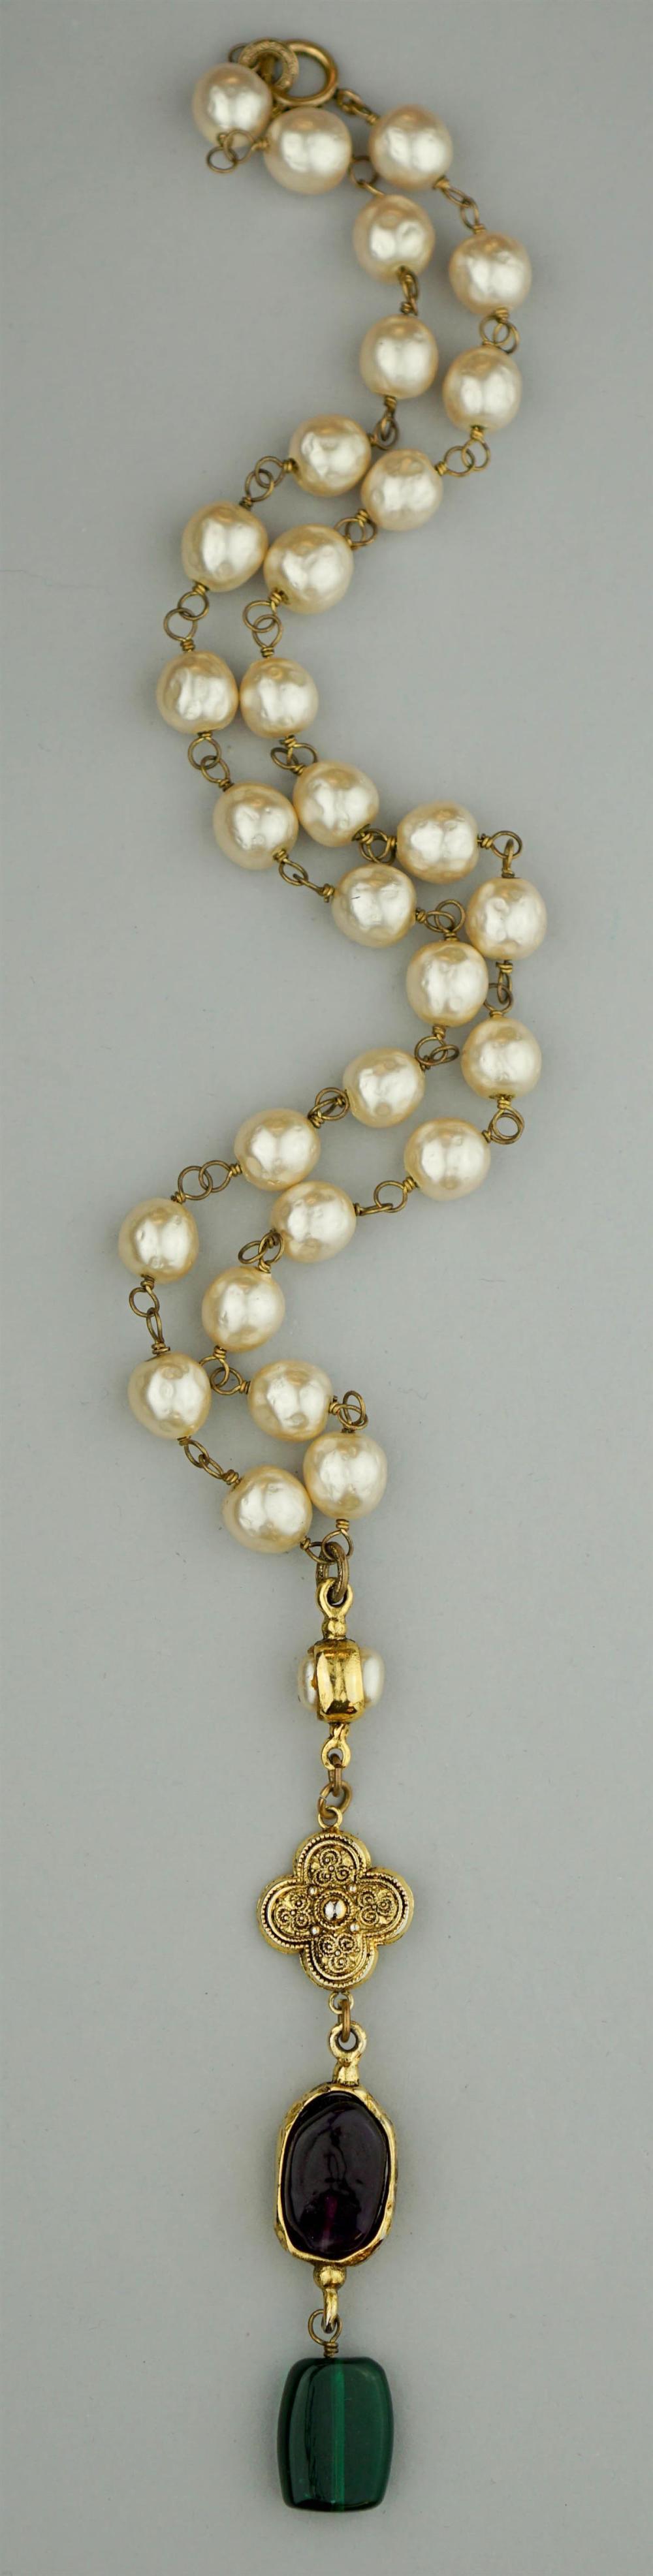 VINTAGE CHANEL FAUX PEARL AND GEMSTONE